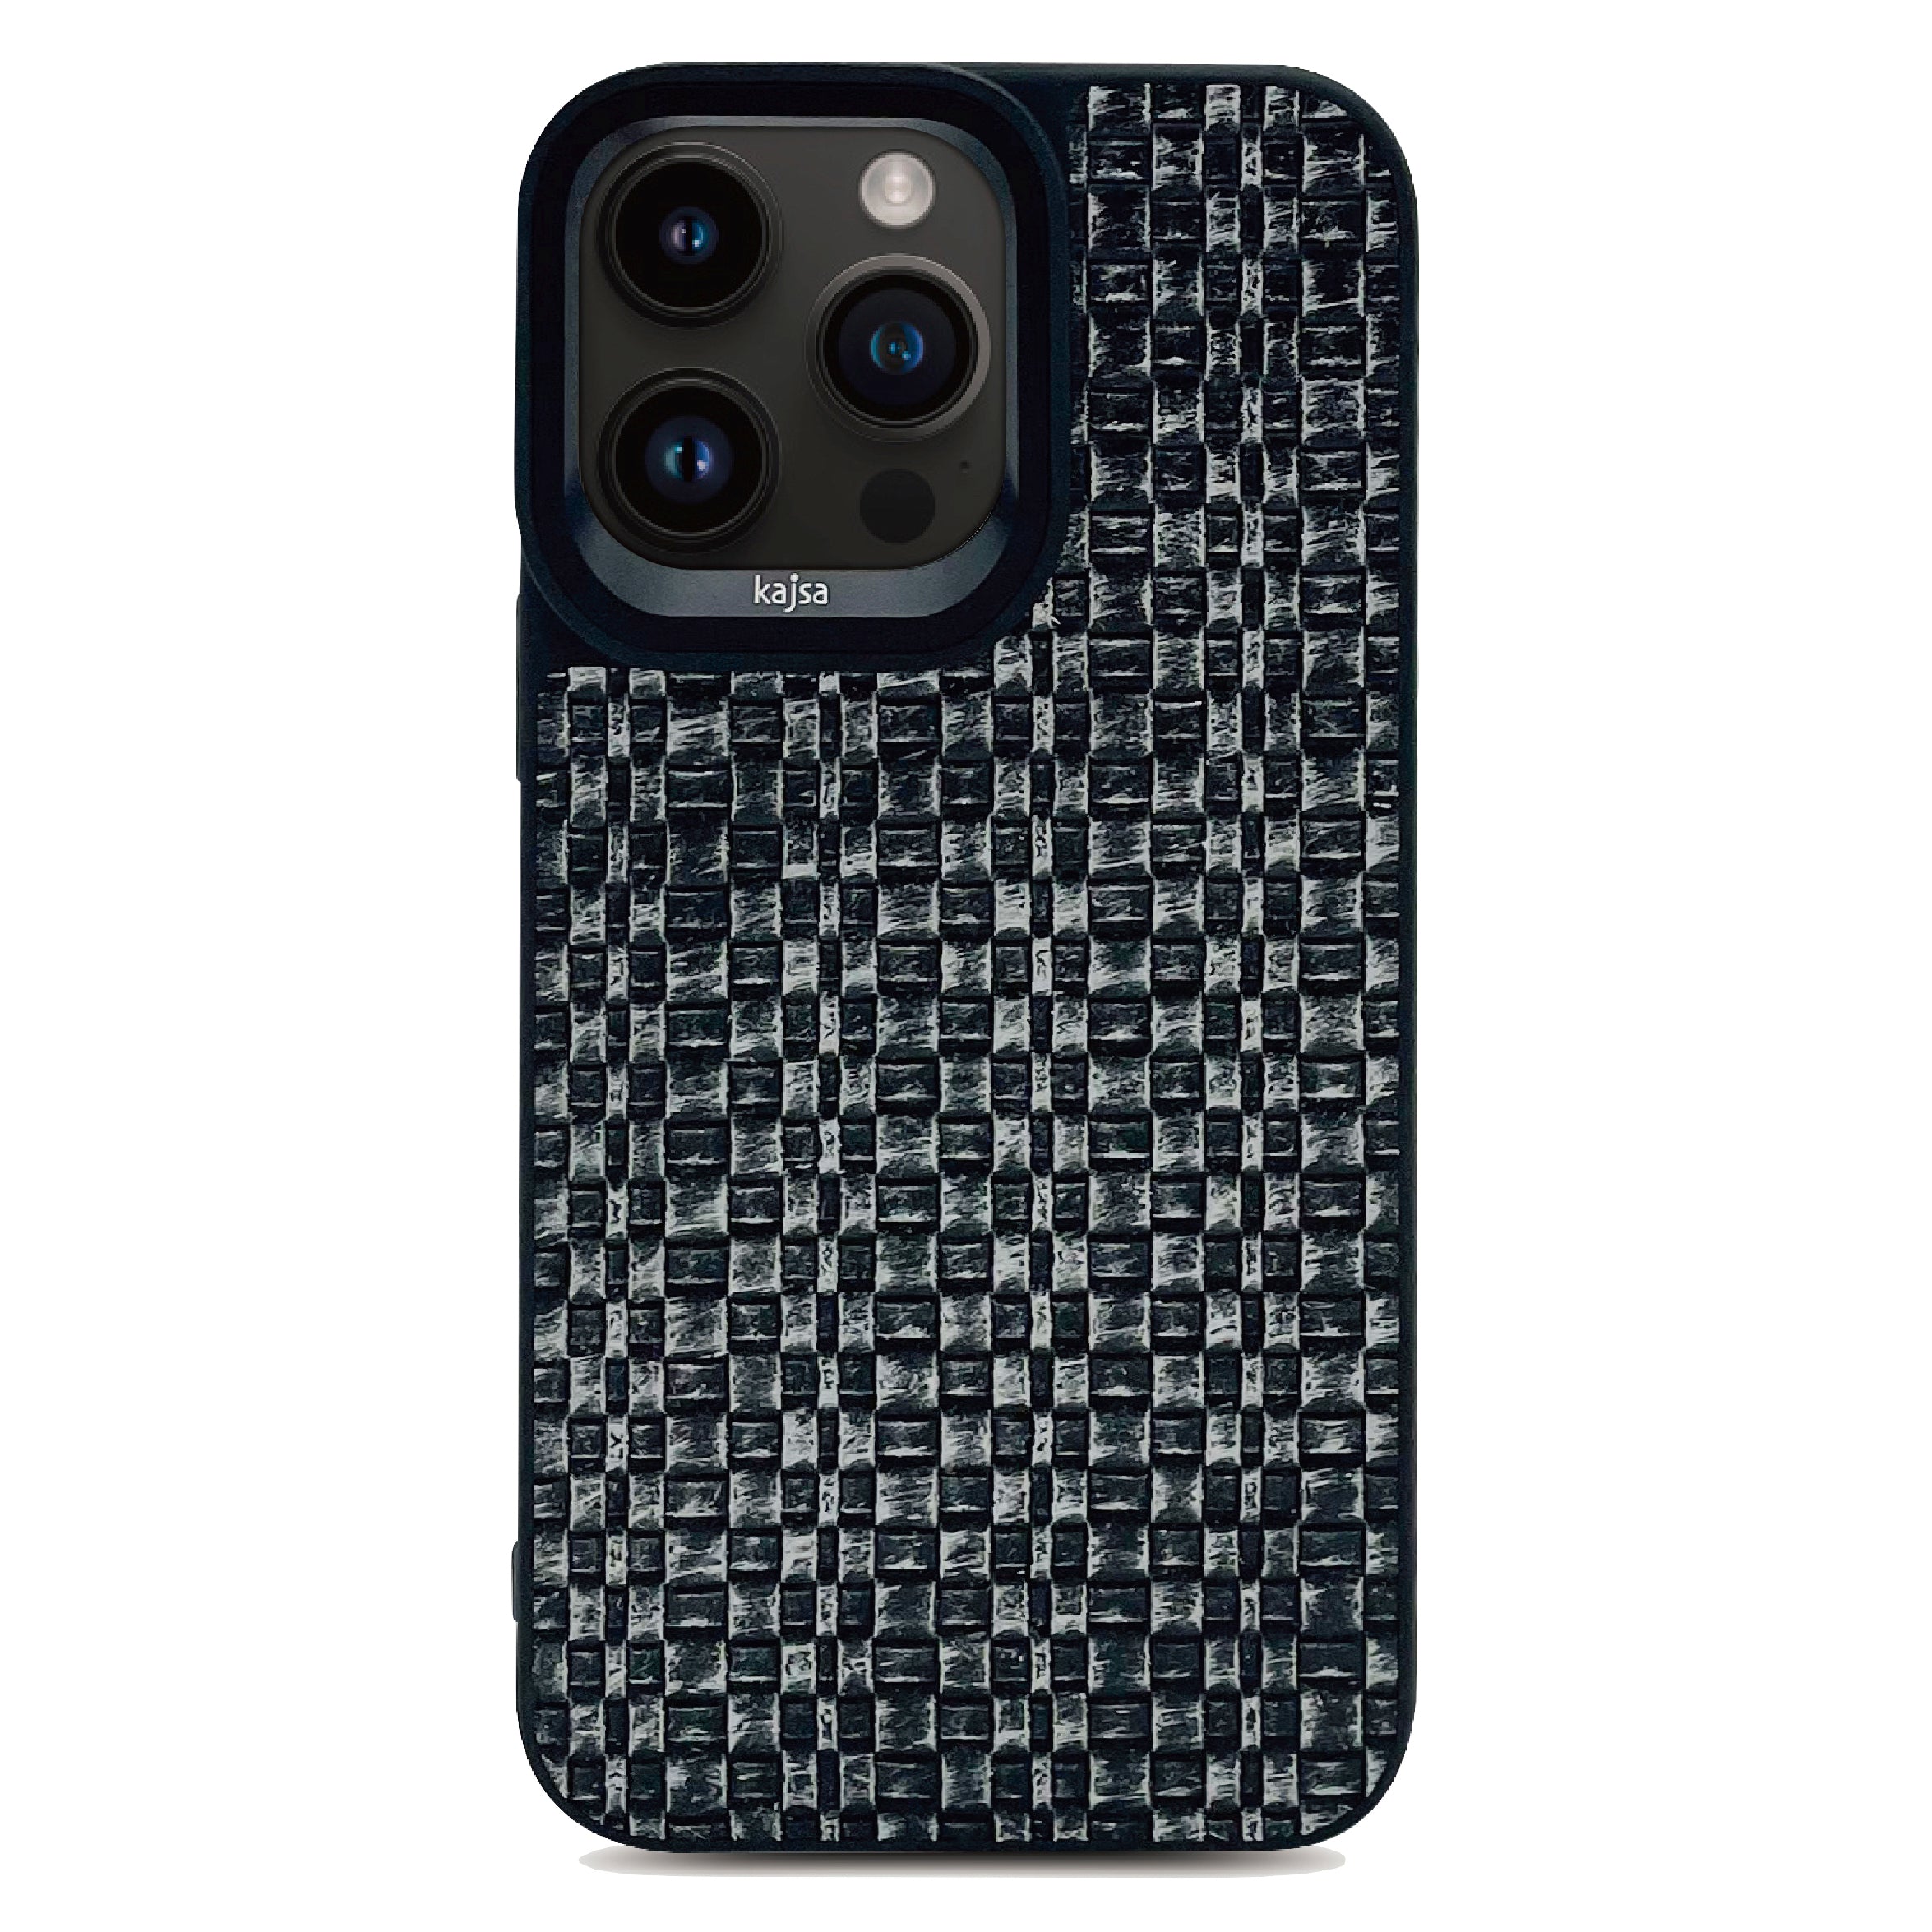 Glamorous Collection - Woven Pattern Back Case for iPhone 14-Phone Case- phone case - phone cases- phone cover- iphone cover- iphone case- iphone cases- leather case- leather cases- DIYCASE - custom case - leather cover - hand strap case - croco pattern case - snake pattern case - carbon fiber phone case - phone case brand - unique phone case - high quality - phone case brand - protective case - buy phone case hong kong - online buy phone case - iphone‎手機殼 - 客製化手機殼 - samsung ‎手機殼 - 香港手機殼 - 買電話殼